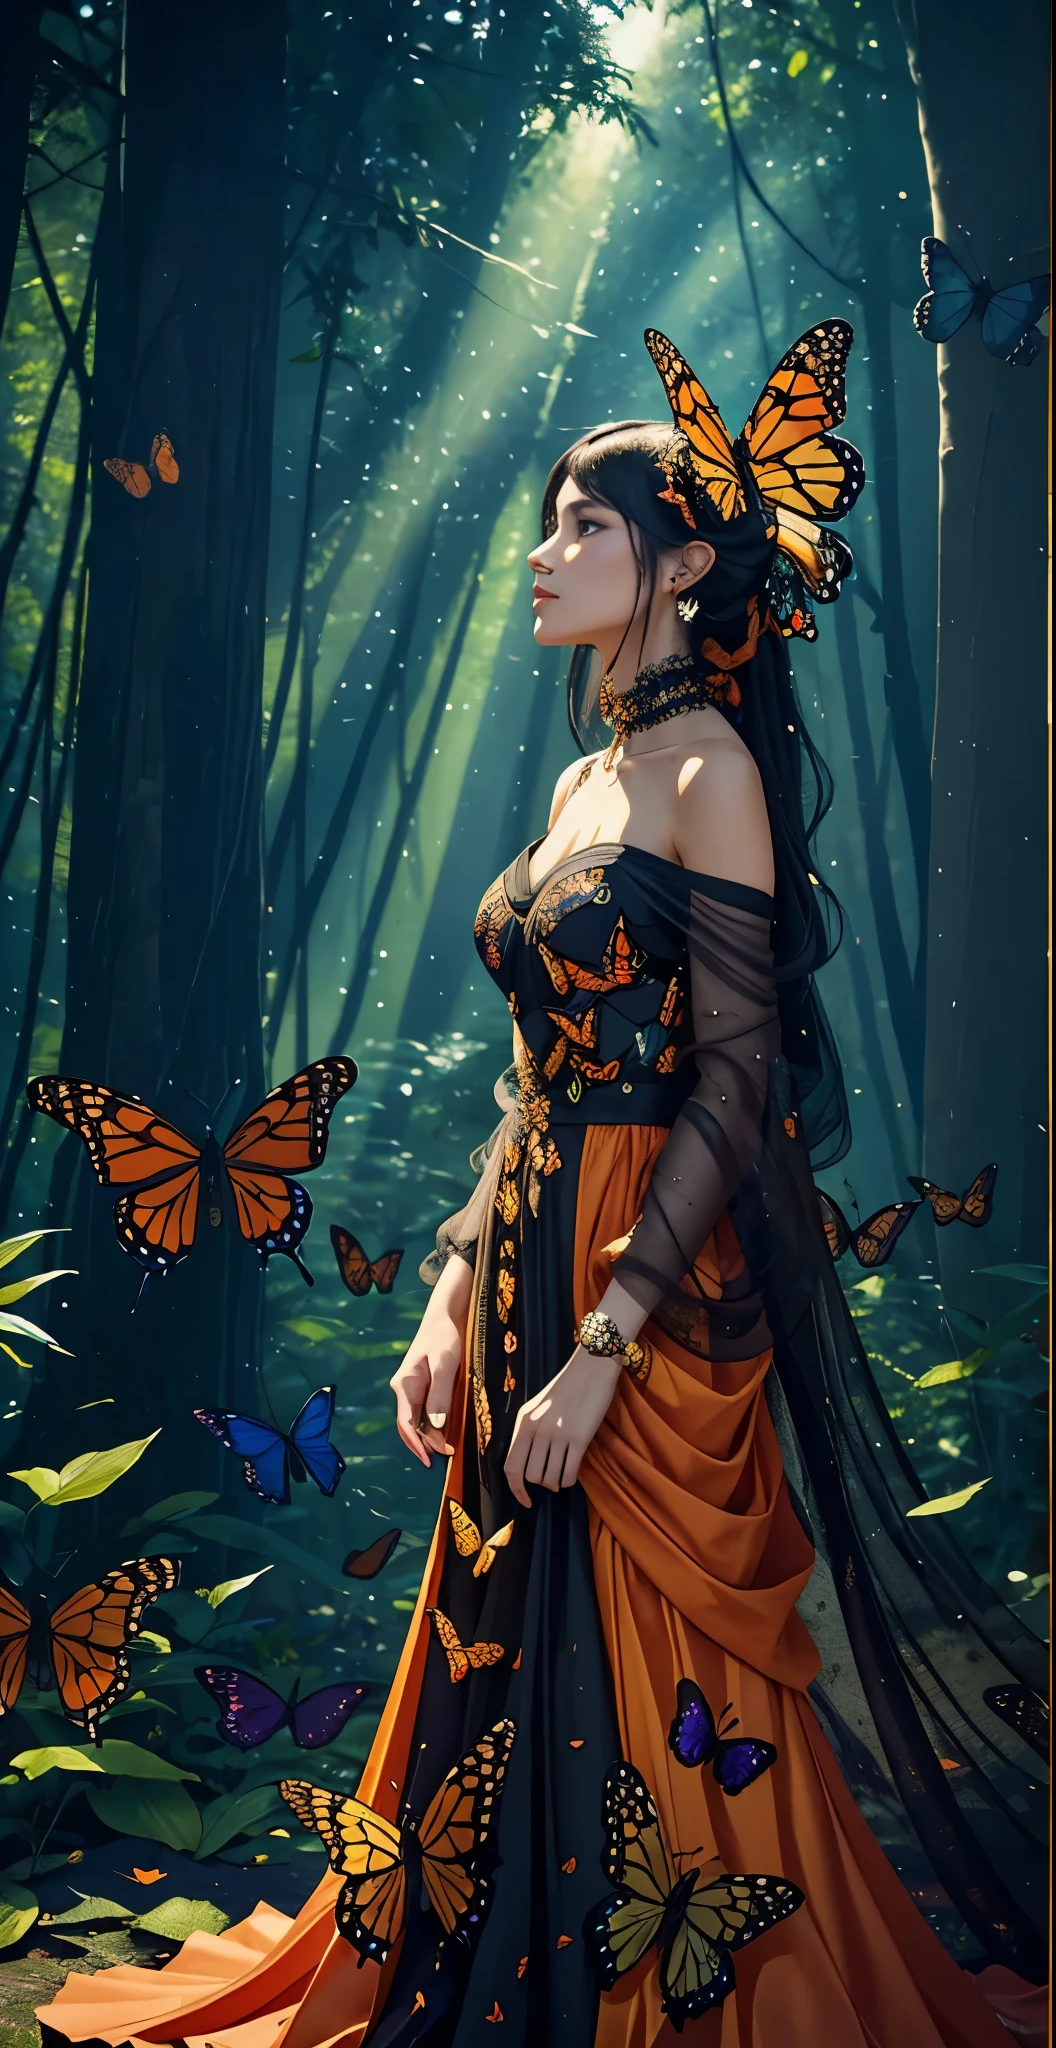 Beautiful dark haired woman covered entirely by millions of Monarch orange black and red butterflies like a second skin a gossamer dress that is almost part of her, covered in butterflies and vibrant multicolored red and black flowers, as if they are coming out of her chest her heart, dappled sun beams through the pine fir forest, hyperdetailed, k resolution, Kodak resampled film grain,(((naturally interacting with the environment:1.5))),(((seamless:1.5))),((strong environmental light)),((hard shadows)),(merge realms of the extreme punk in a tapestry of dualities),enigmatic beings with ethereal silhouettes,digital dreamscape.Illuminate the scene with the pulse of a celestial bloom,(casting hues that bridge both cosmic and cybernetic realms).(Blend brushstrokes harmoniously),fusing elements of traditional artistry with glitched fragments of a pixelated mosaic.Embrace asymmetry,where the organic and the synthetic collide in a dynamic composition.(Infuse a shifting timeless vibrant palette).Integrate augmented reality surprises. by Da Vinci